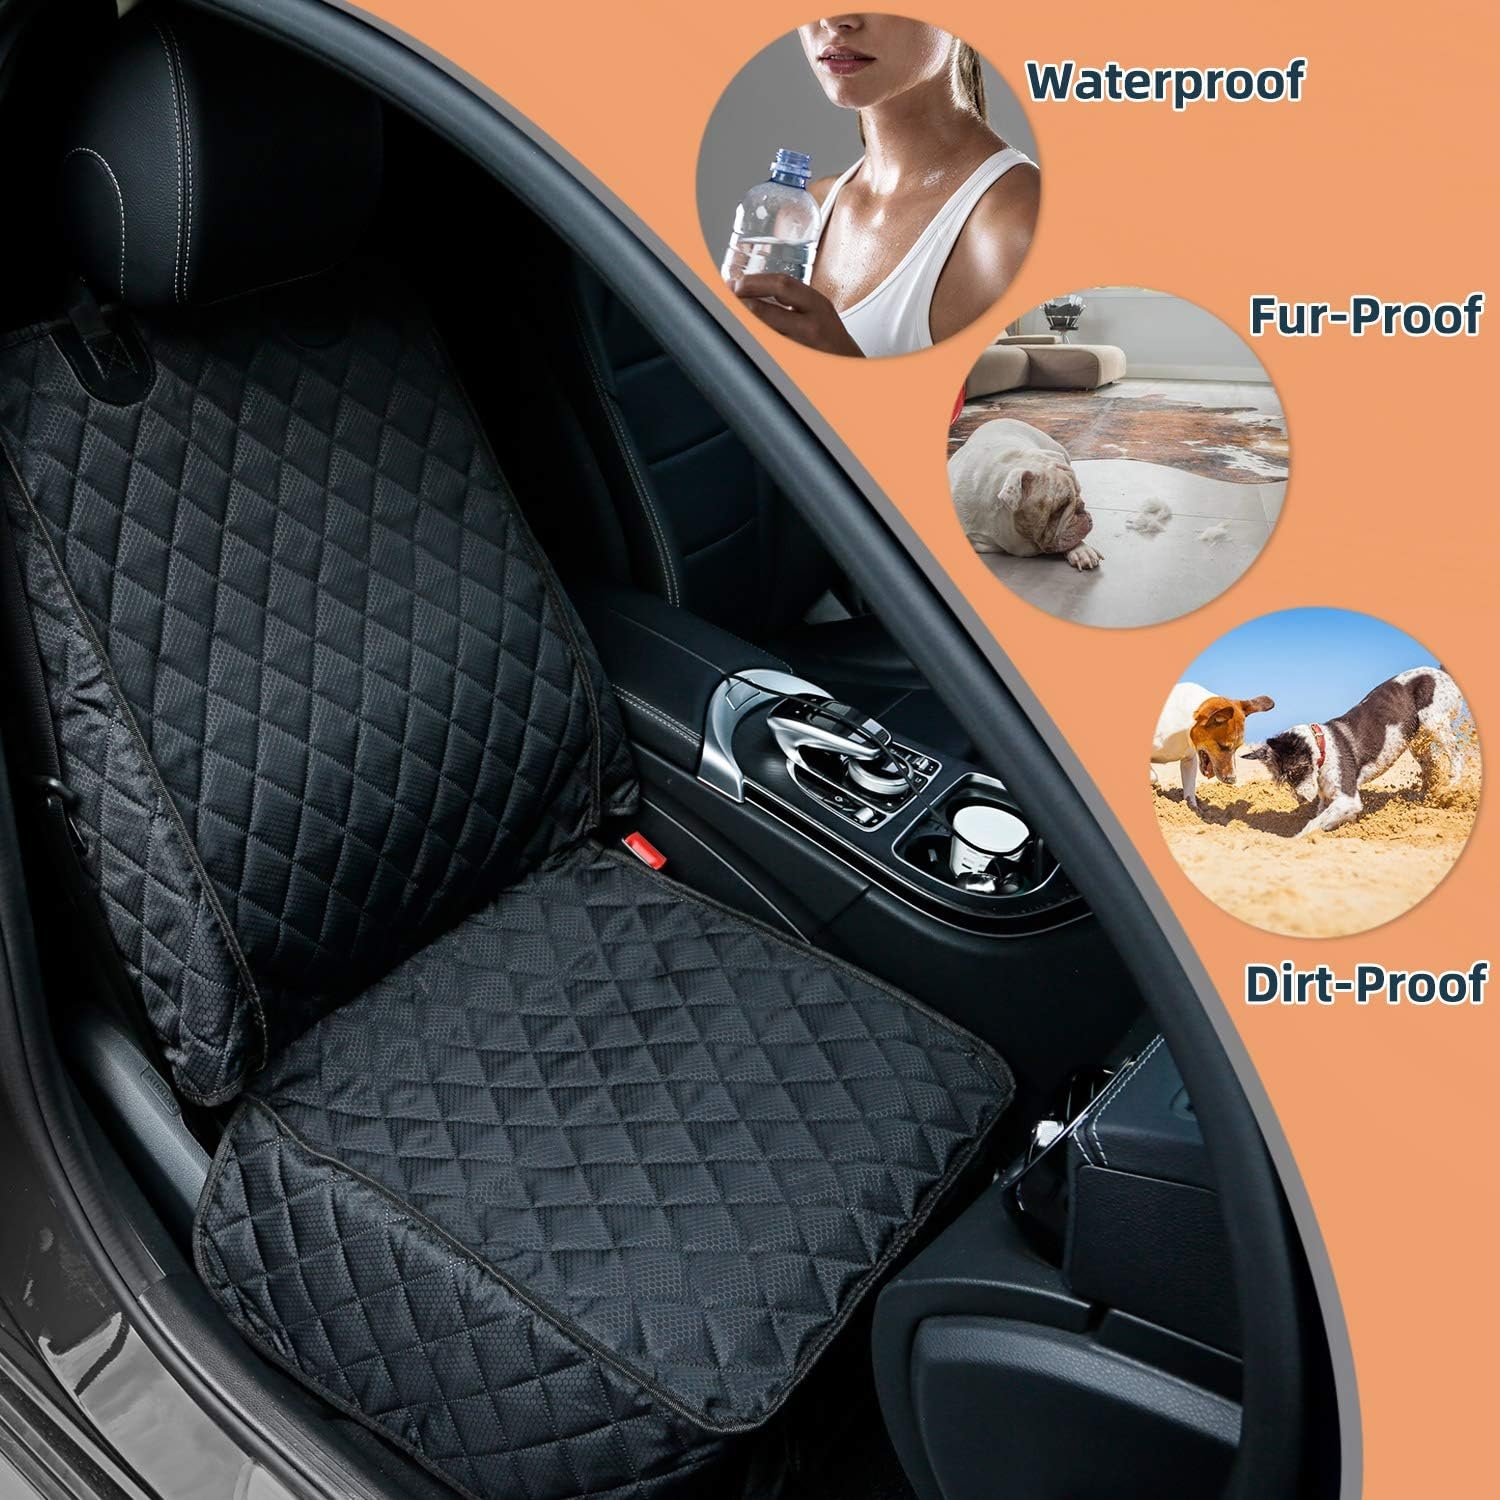 PETICON Waterproof Front Seat Car Cover, Full Protection Dog Car Seat Cover with Side Flaps, Nonslip Scratchproof Captain Chair Seat Cover Fits for Cars, Trucks, SUVs, Jeep